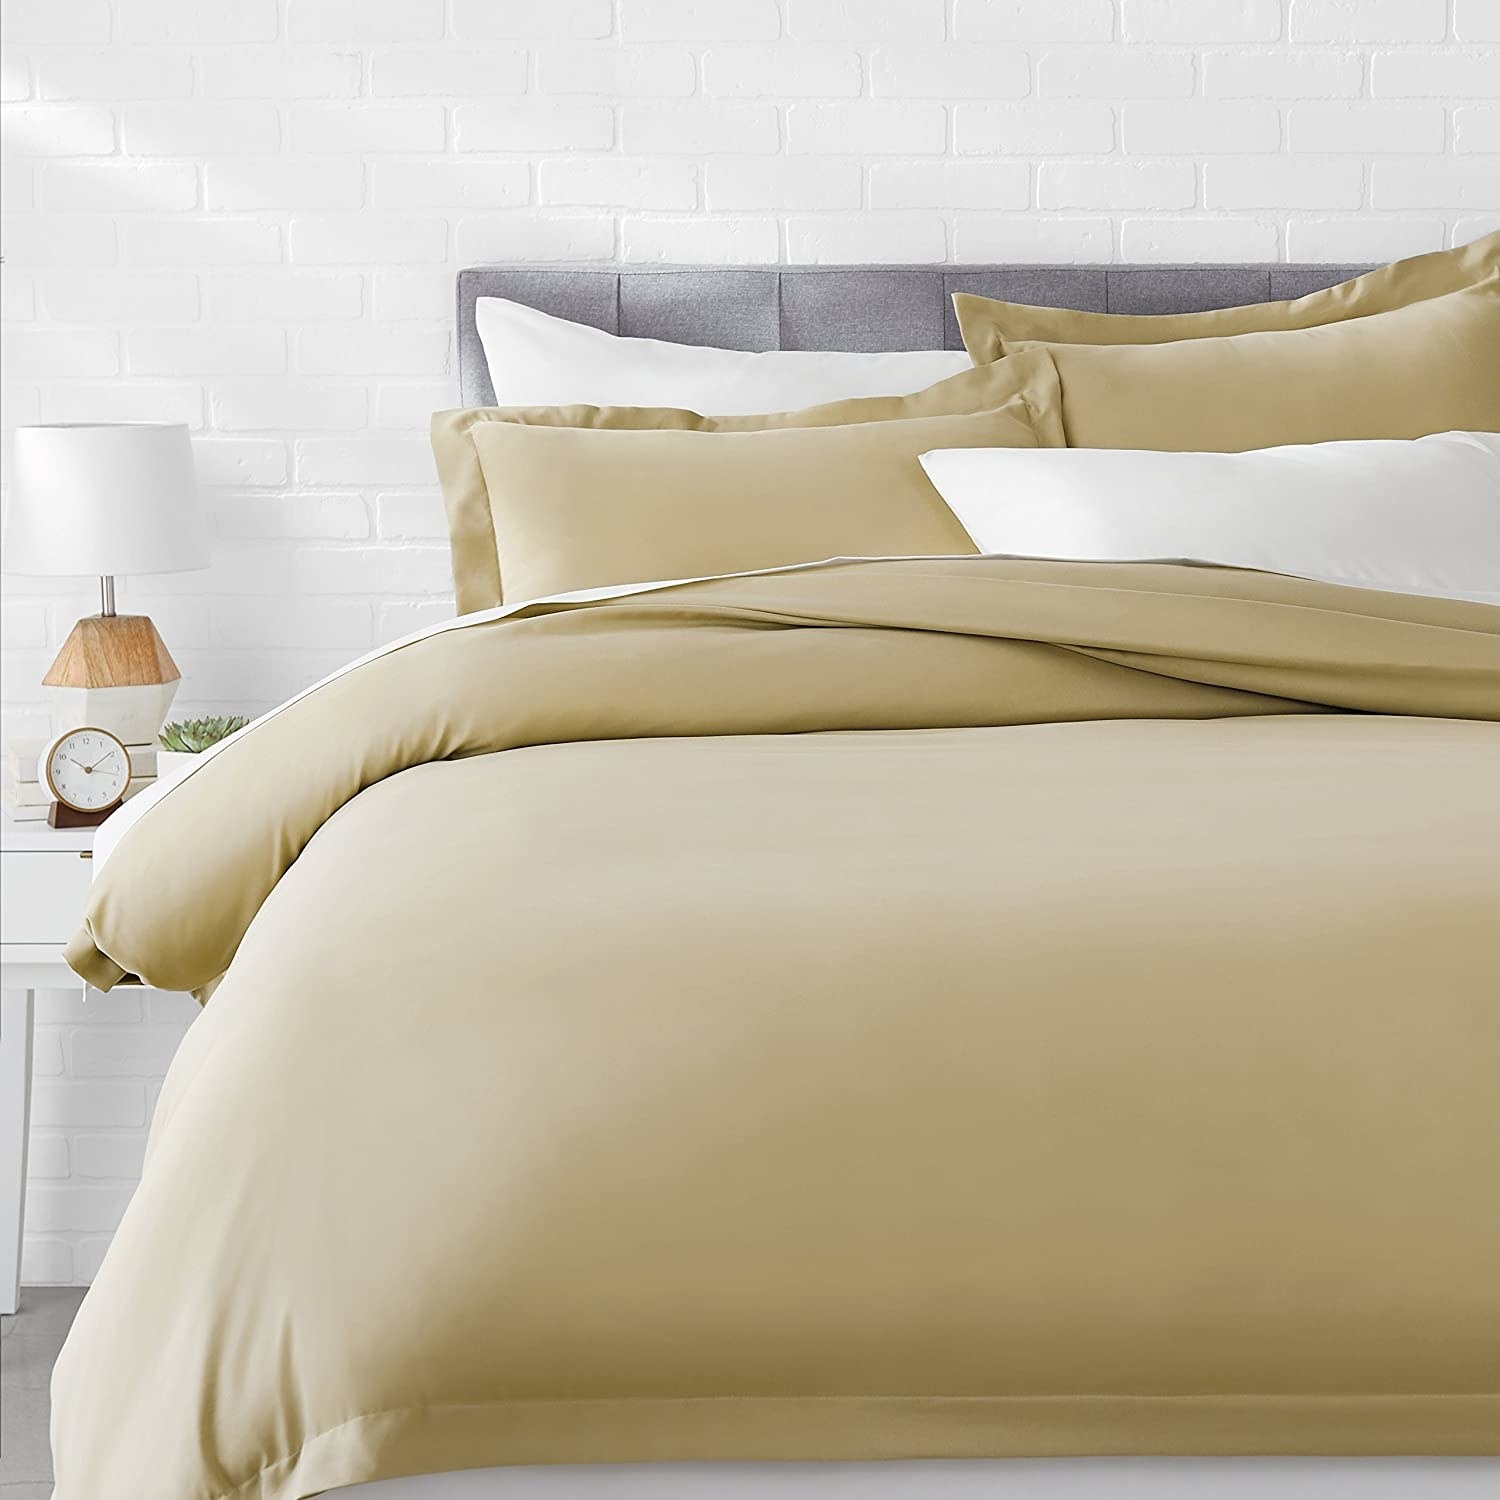 A beige duvet cover on a bed